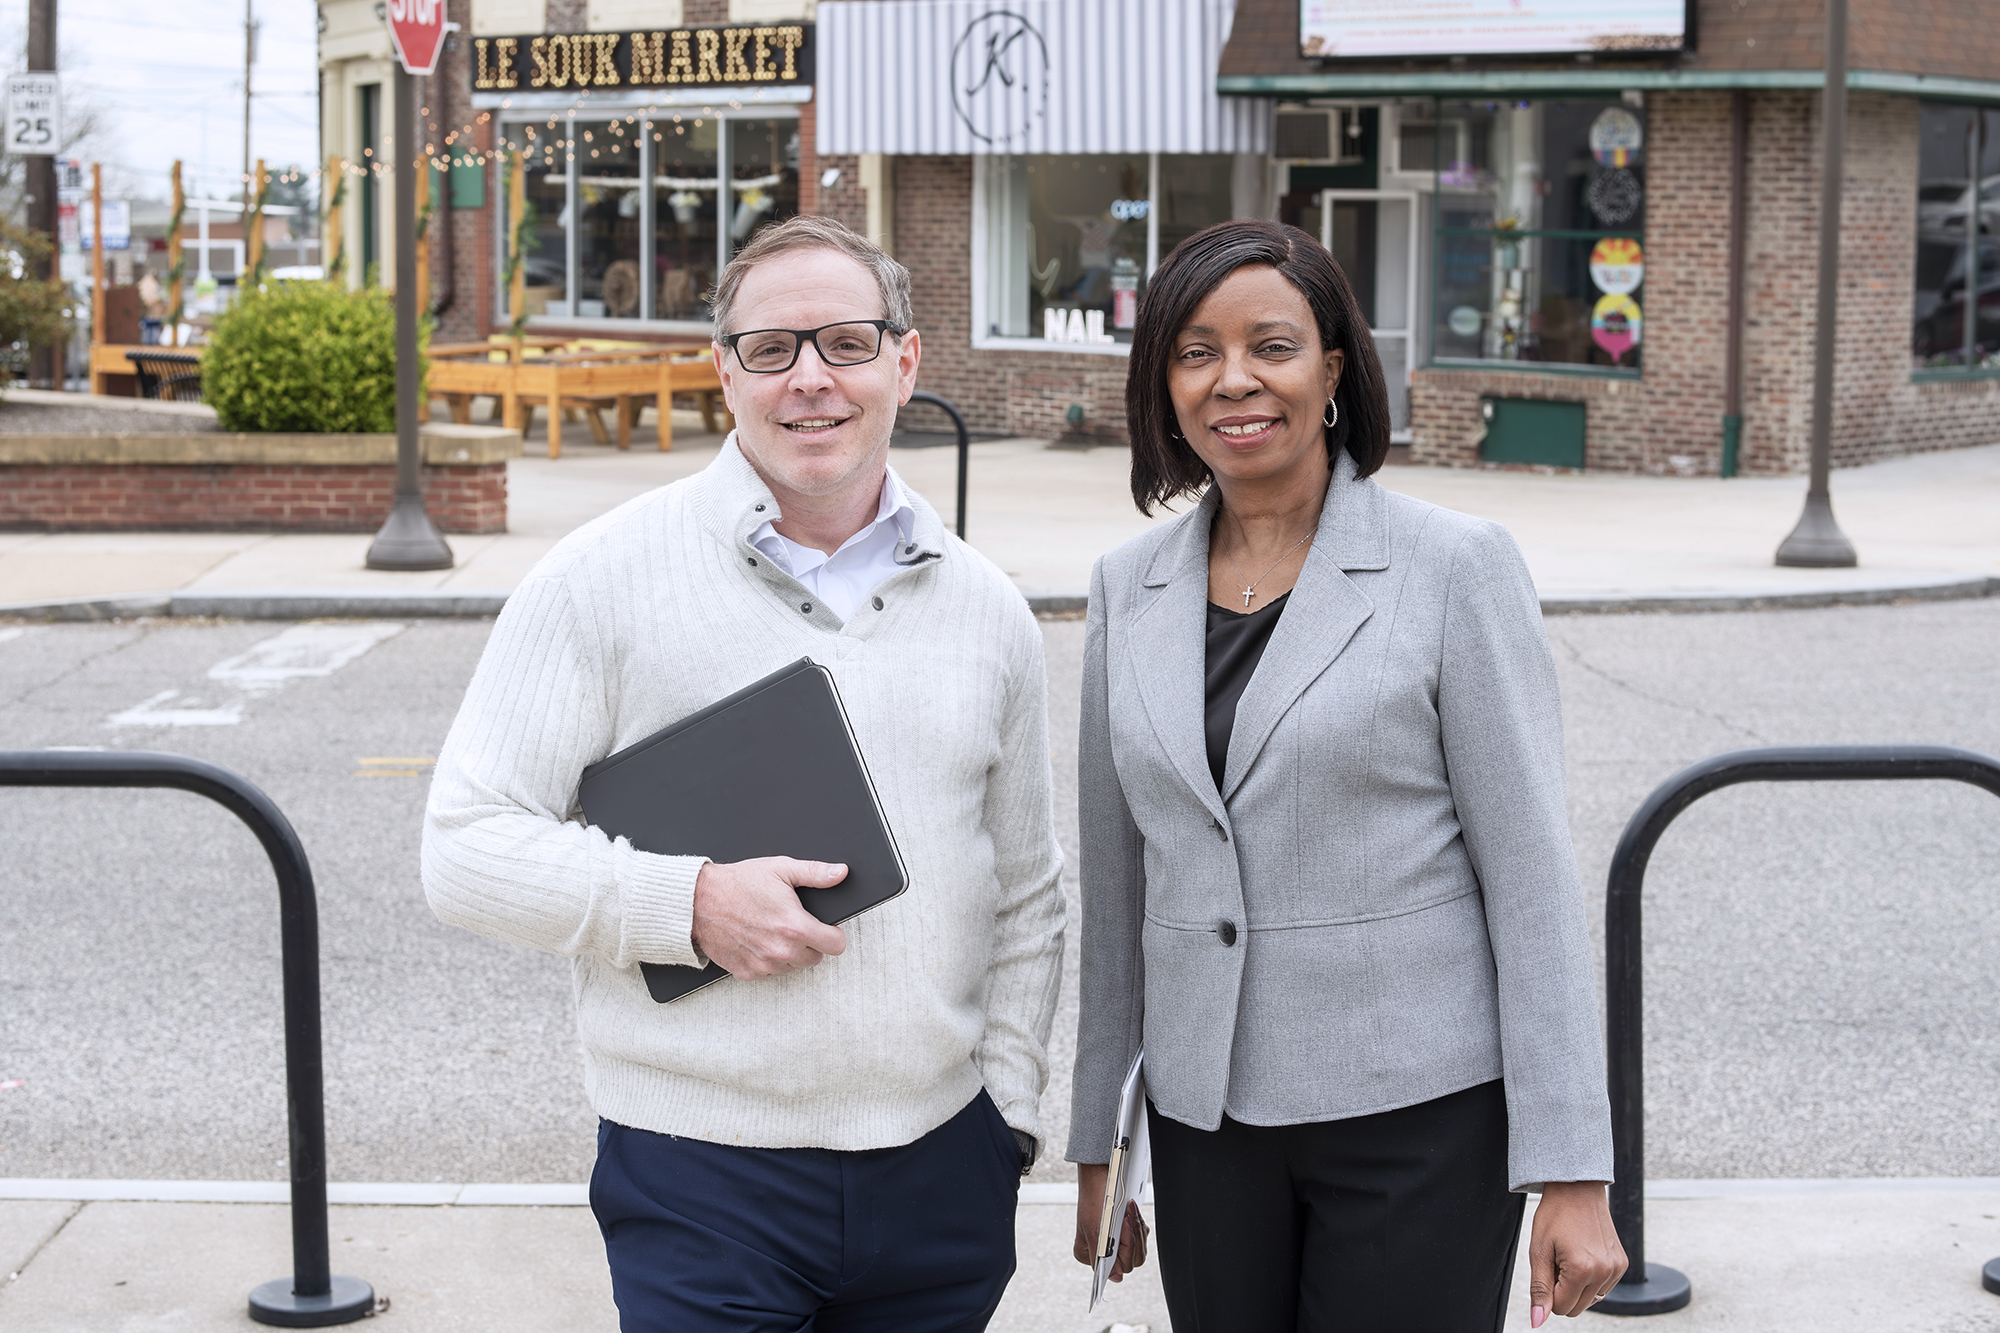 Drs. Charnita Zeigler-Johnson and Kevin Henry standing on a street